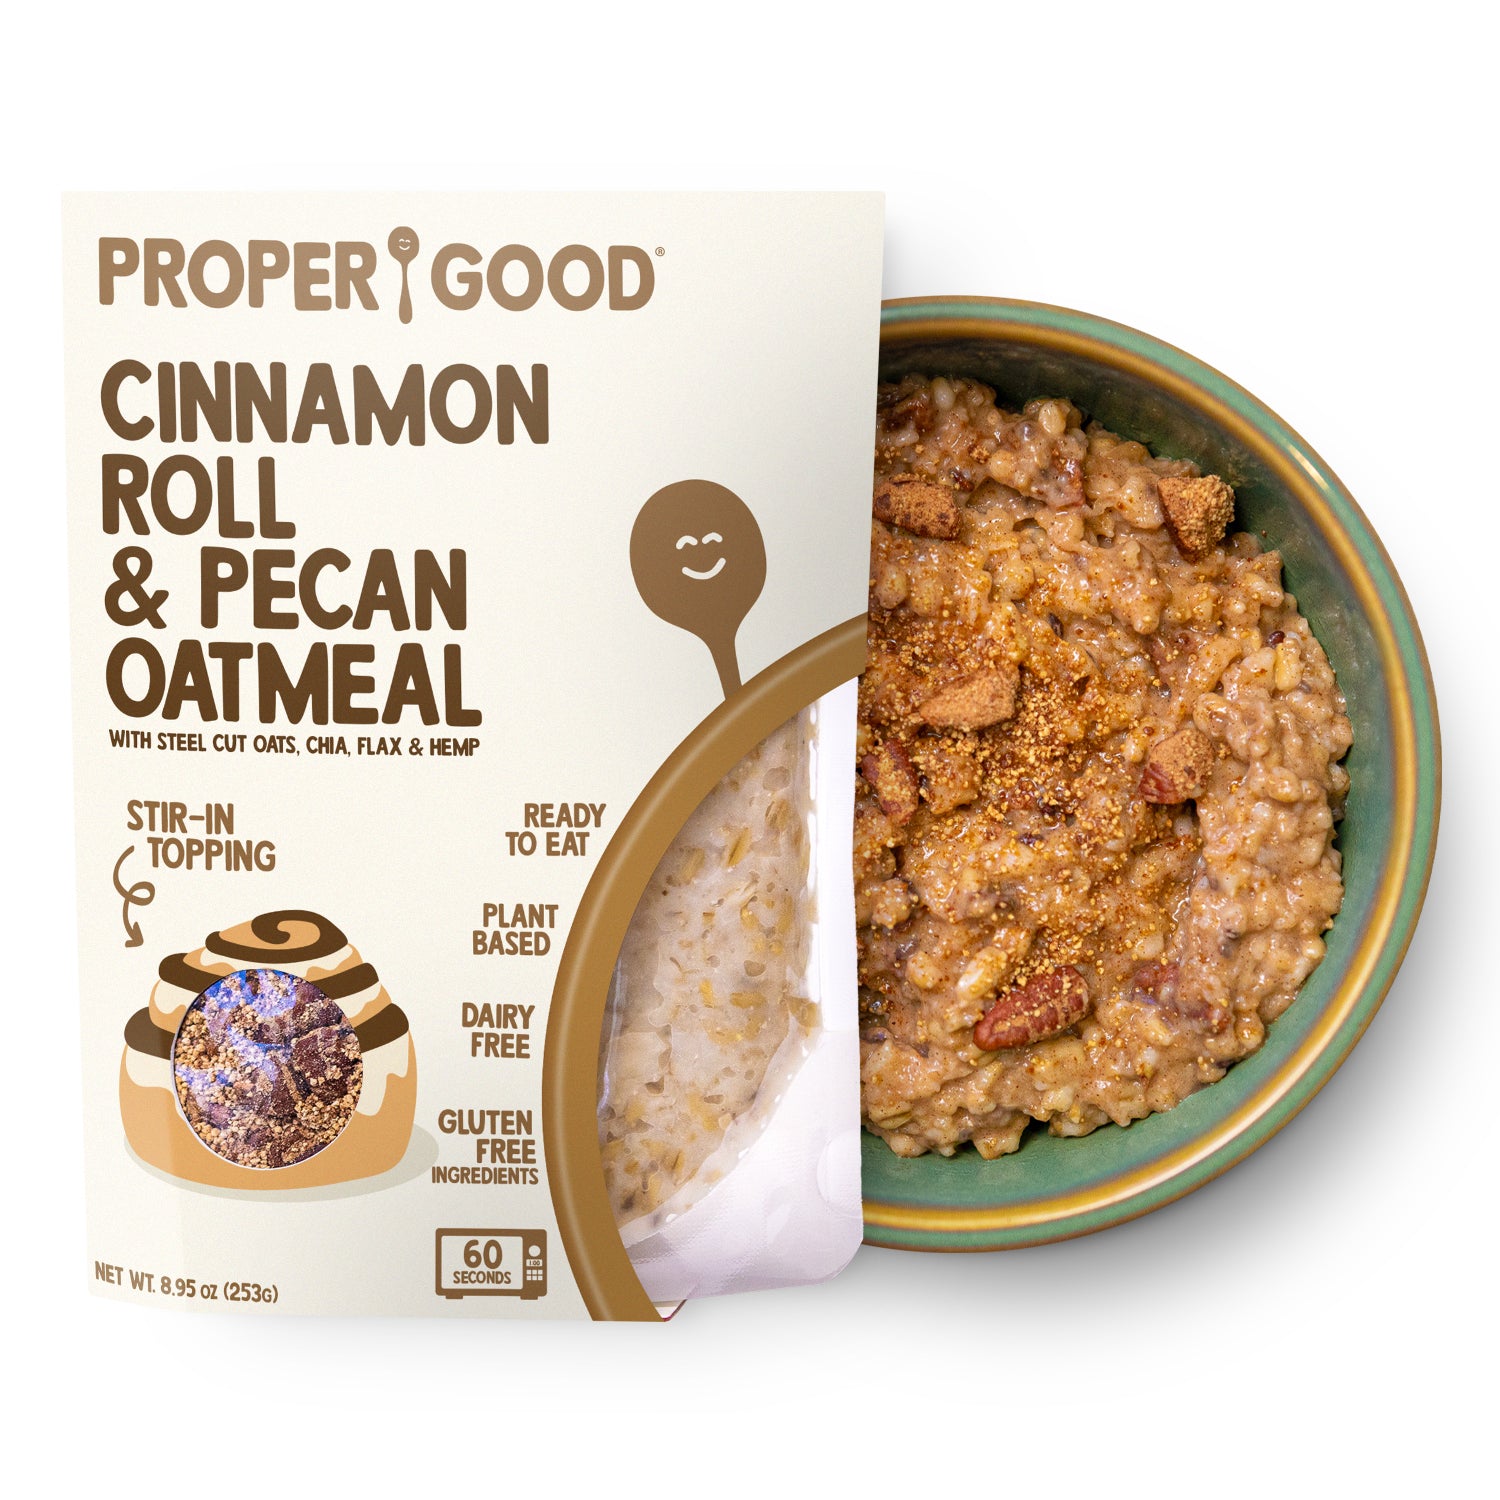 Cinnamon Roll & Pecan Oatmeal in Bowl and in Pouch - Eat Proper Good